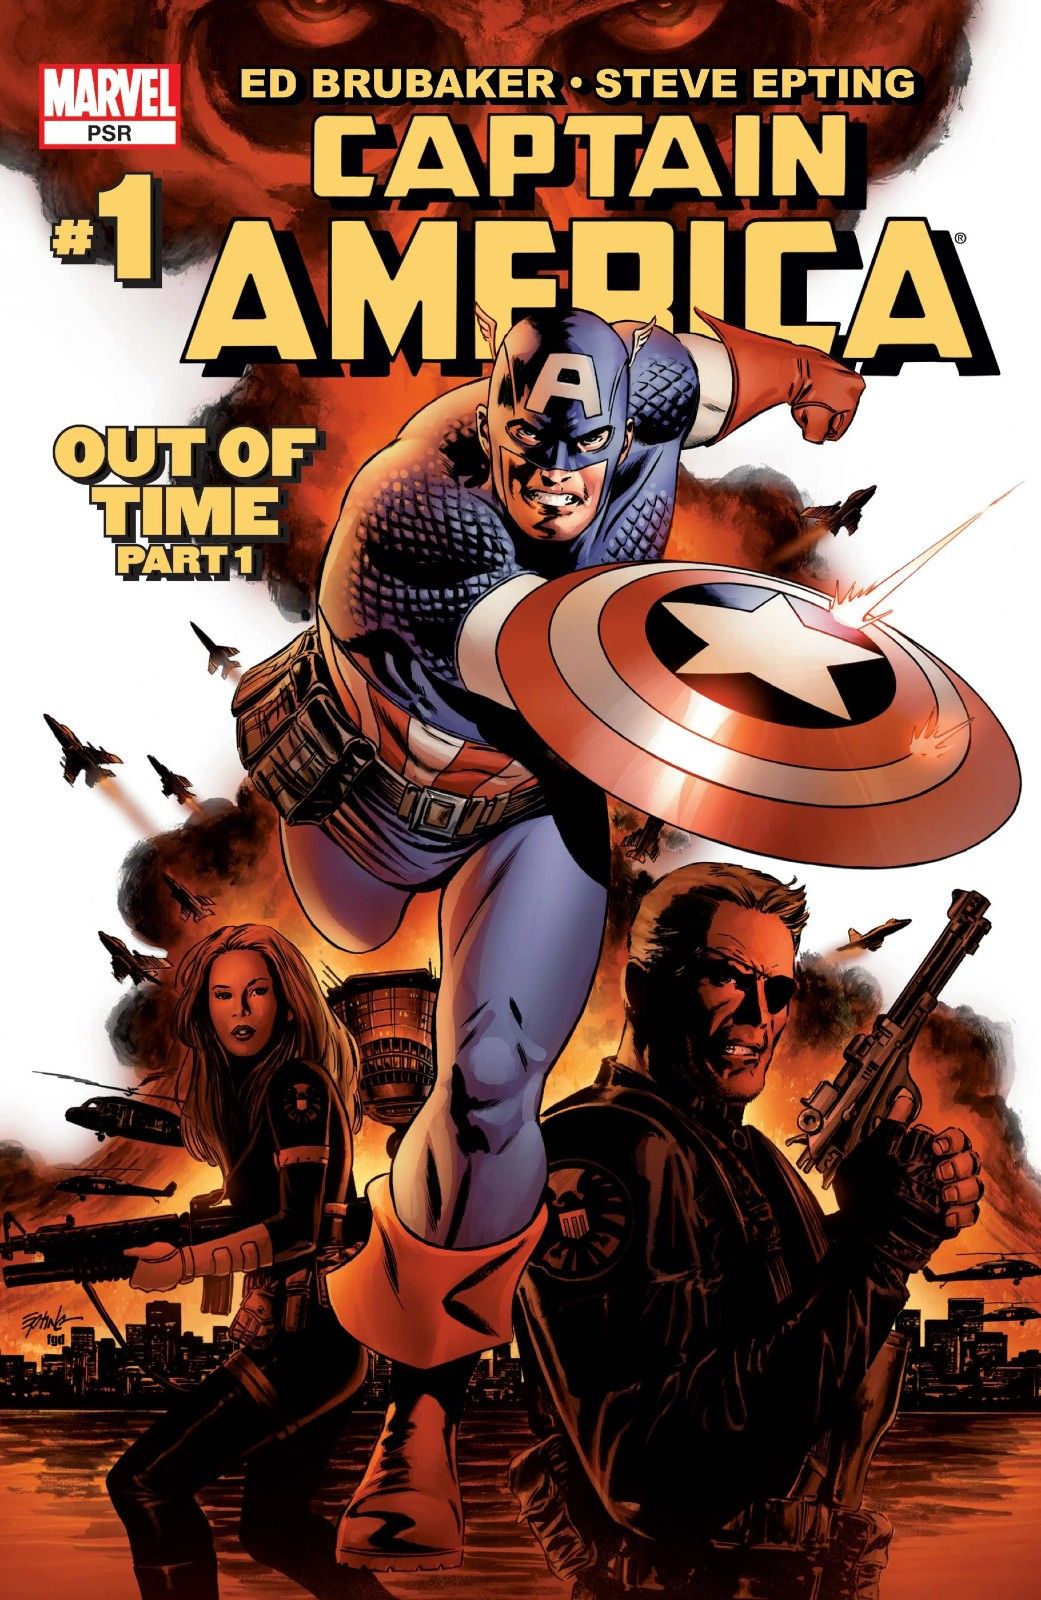 Captain America running with an explosion behind him in Captain America (Vol. 5) #1 by Marvel